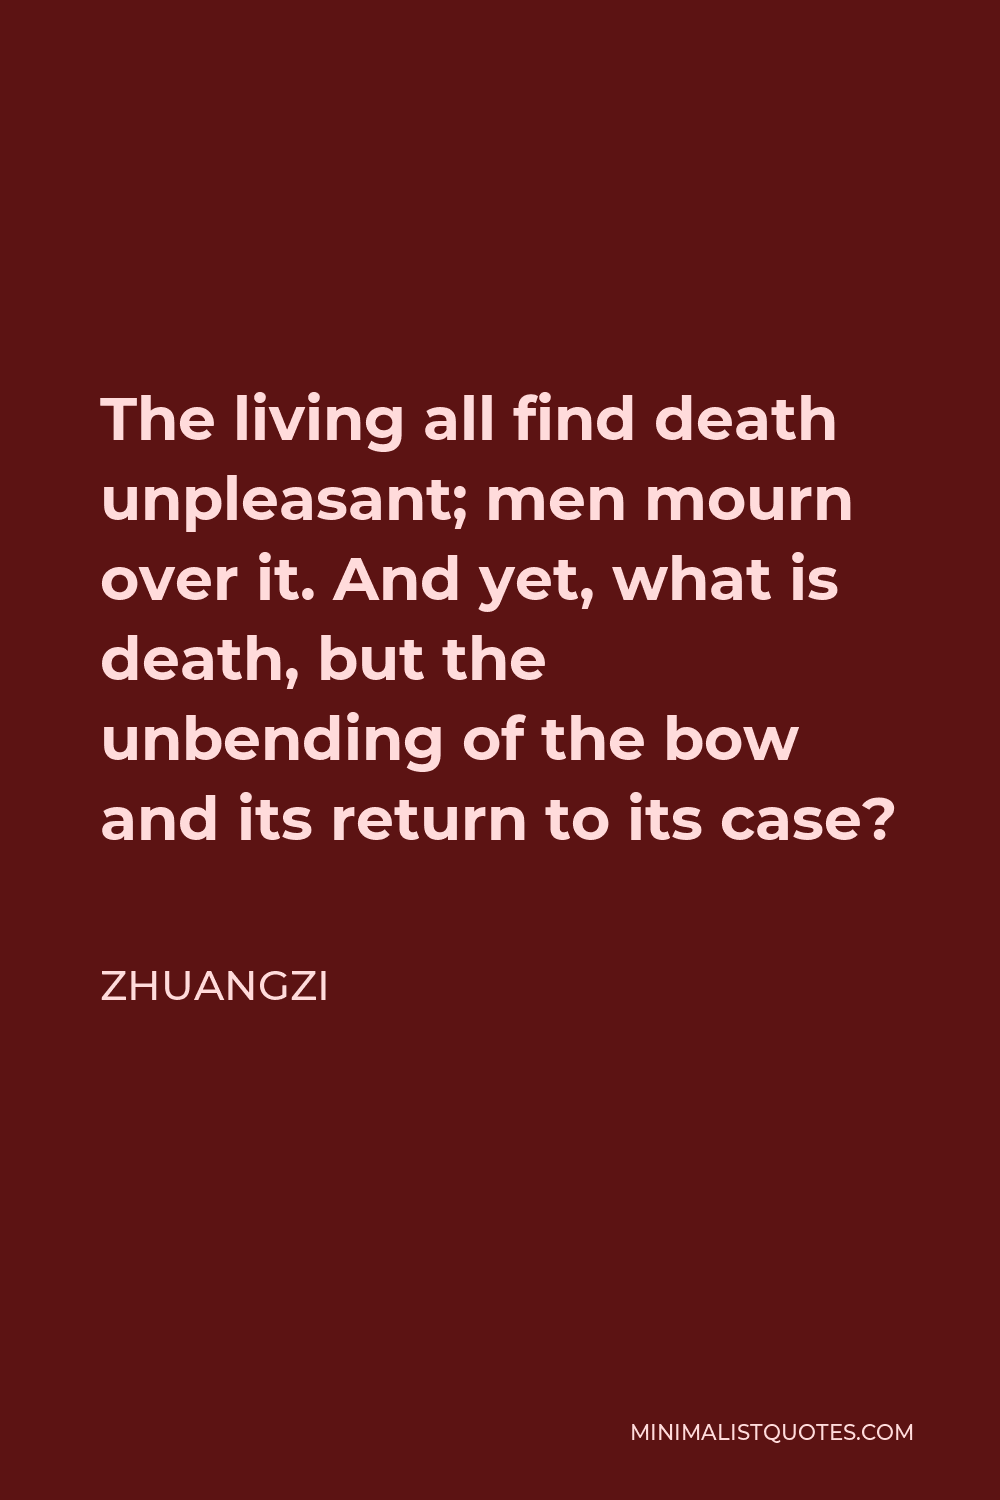 Zhuangzi Quote - The living all find death unpleasant; men mourn over it. And yet, what is death, but the unbending of the bow and its return to its case?